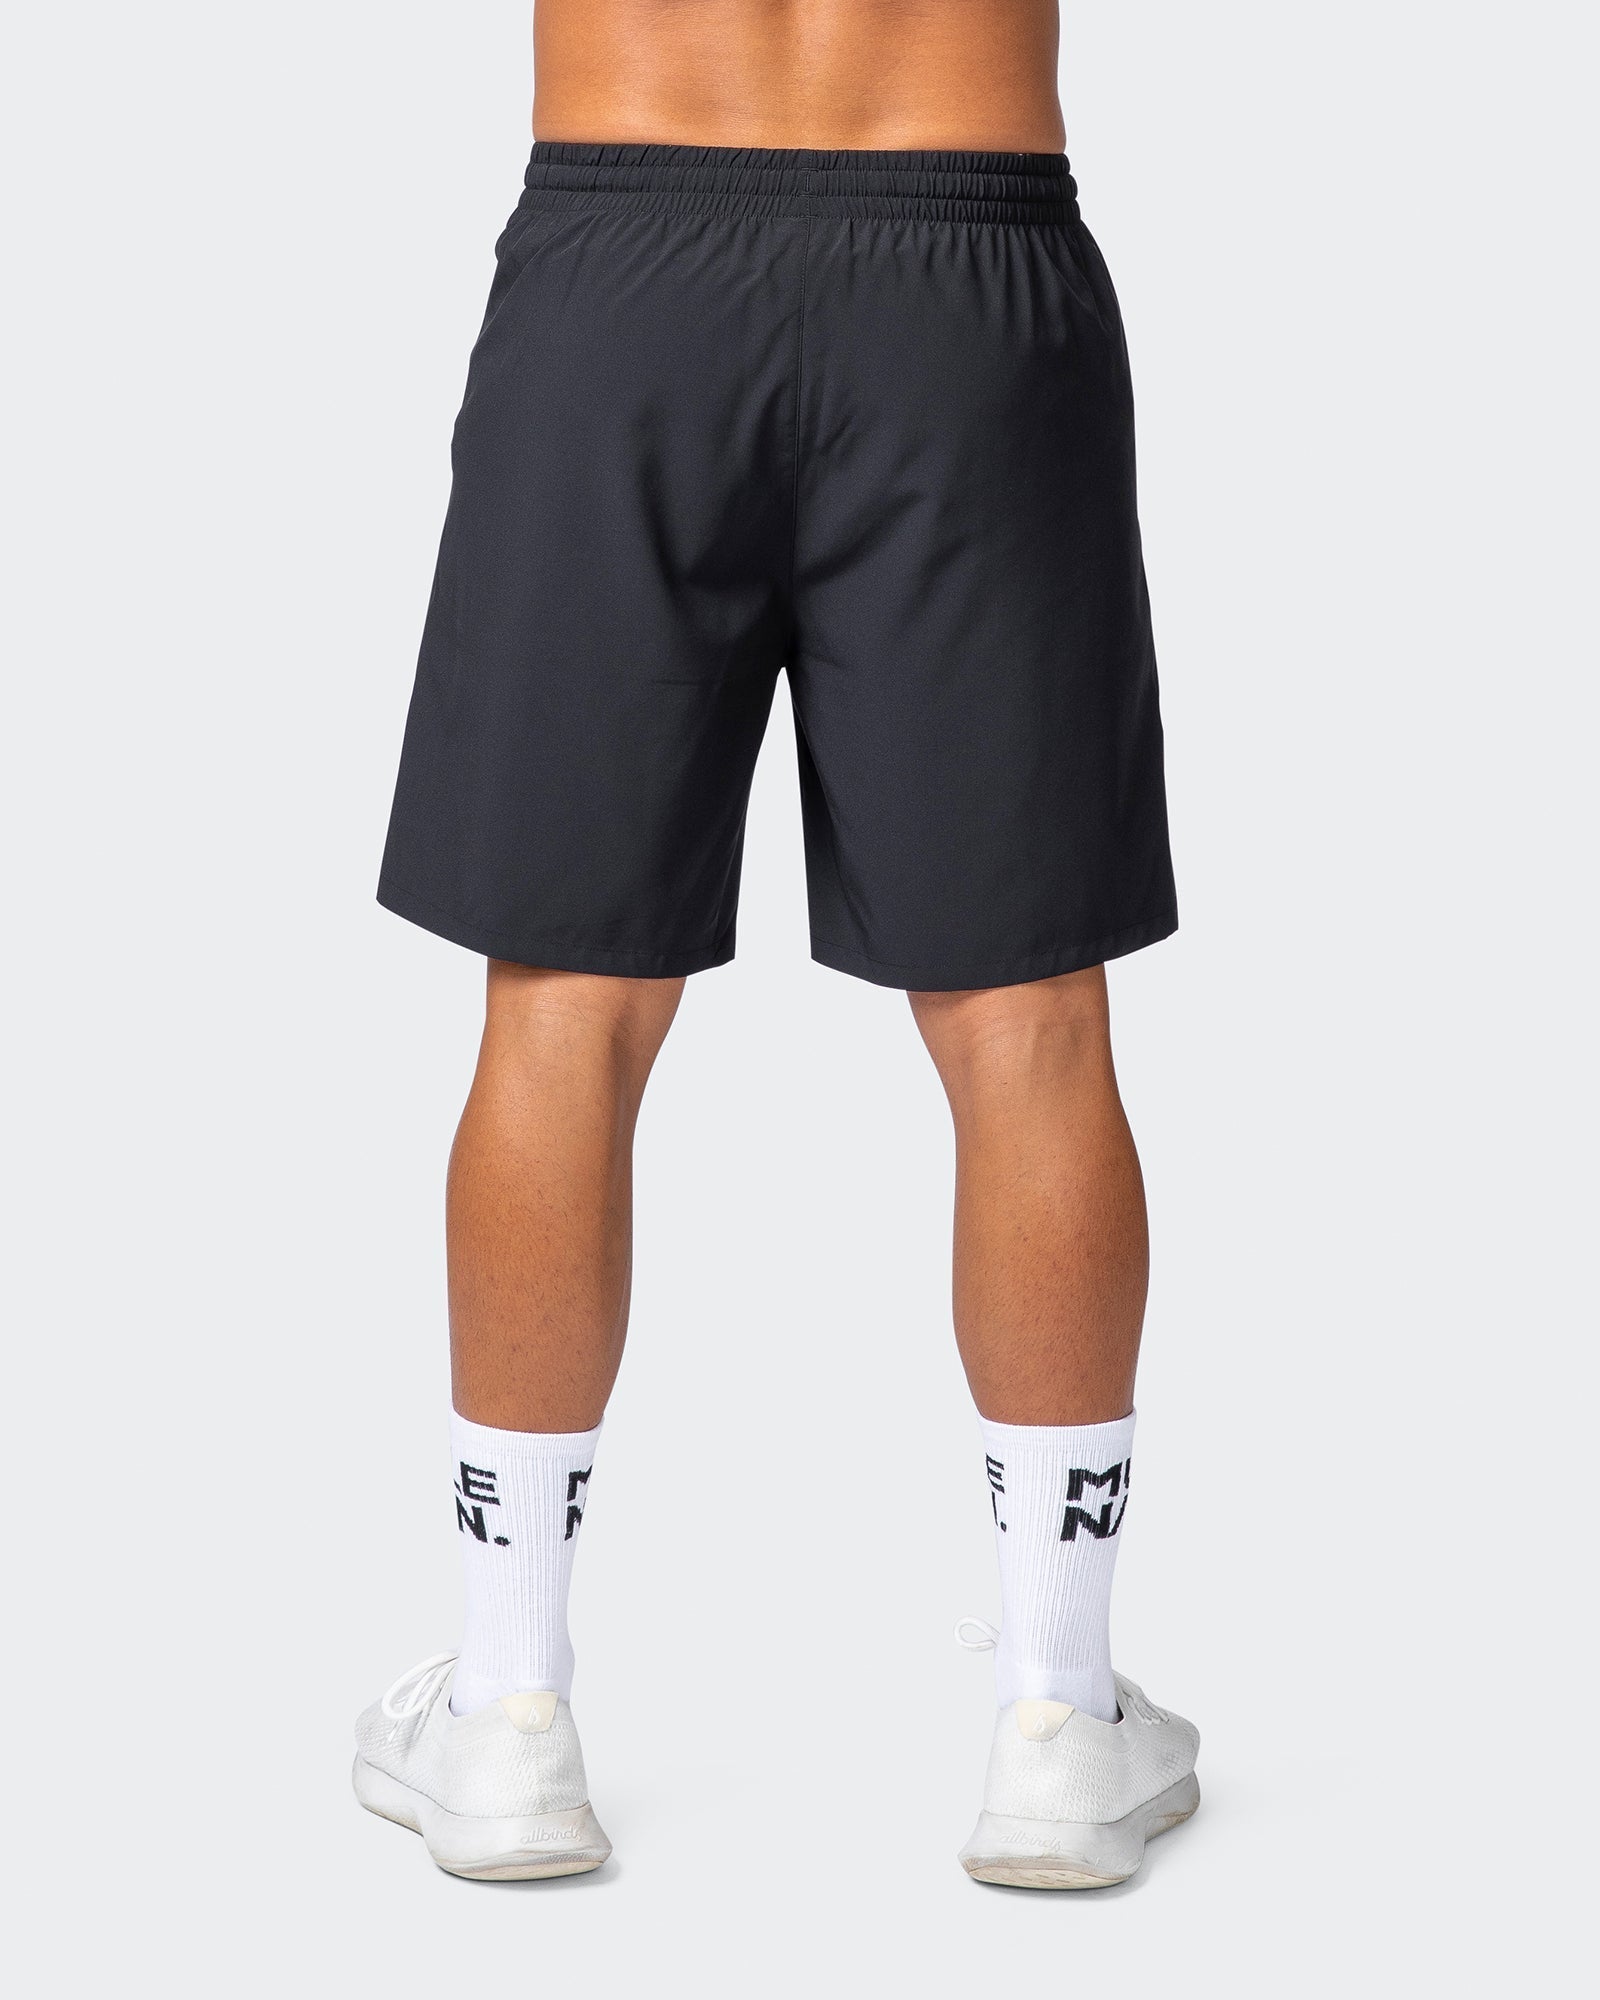 musclenation NEW HEIGHTS 7" SHORTS Black